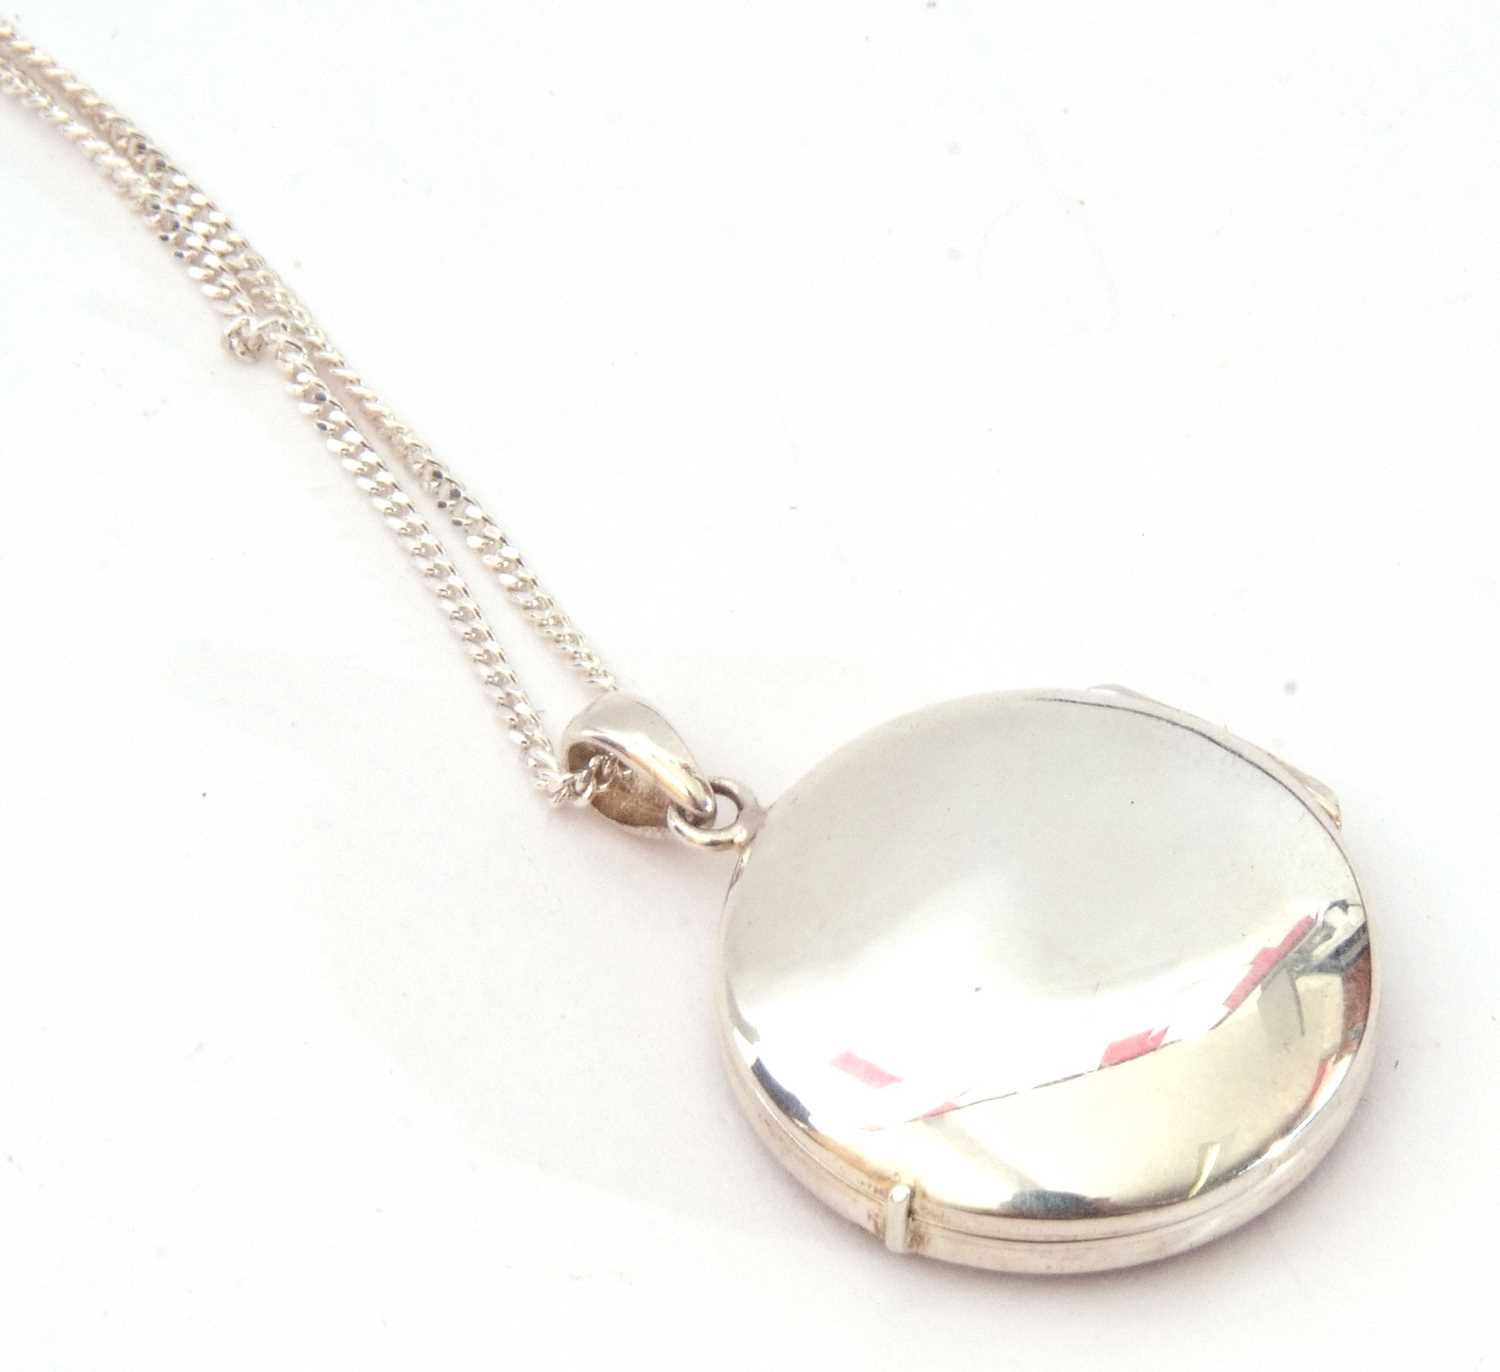 Modern white metal and Blue John hinged locket, 22mm diam, suspended from a 925 marked chain - Image 4 of 6